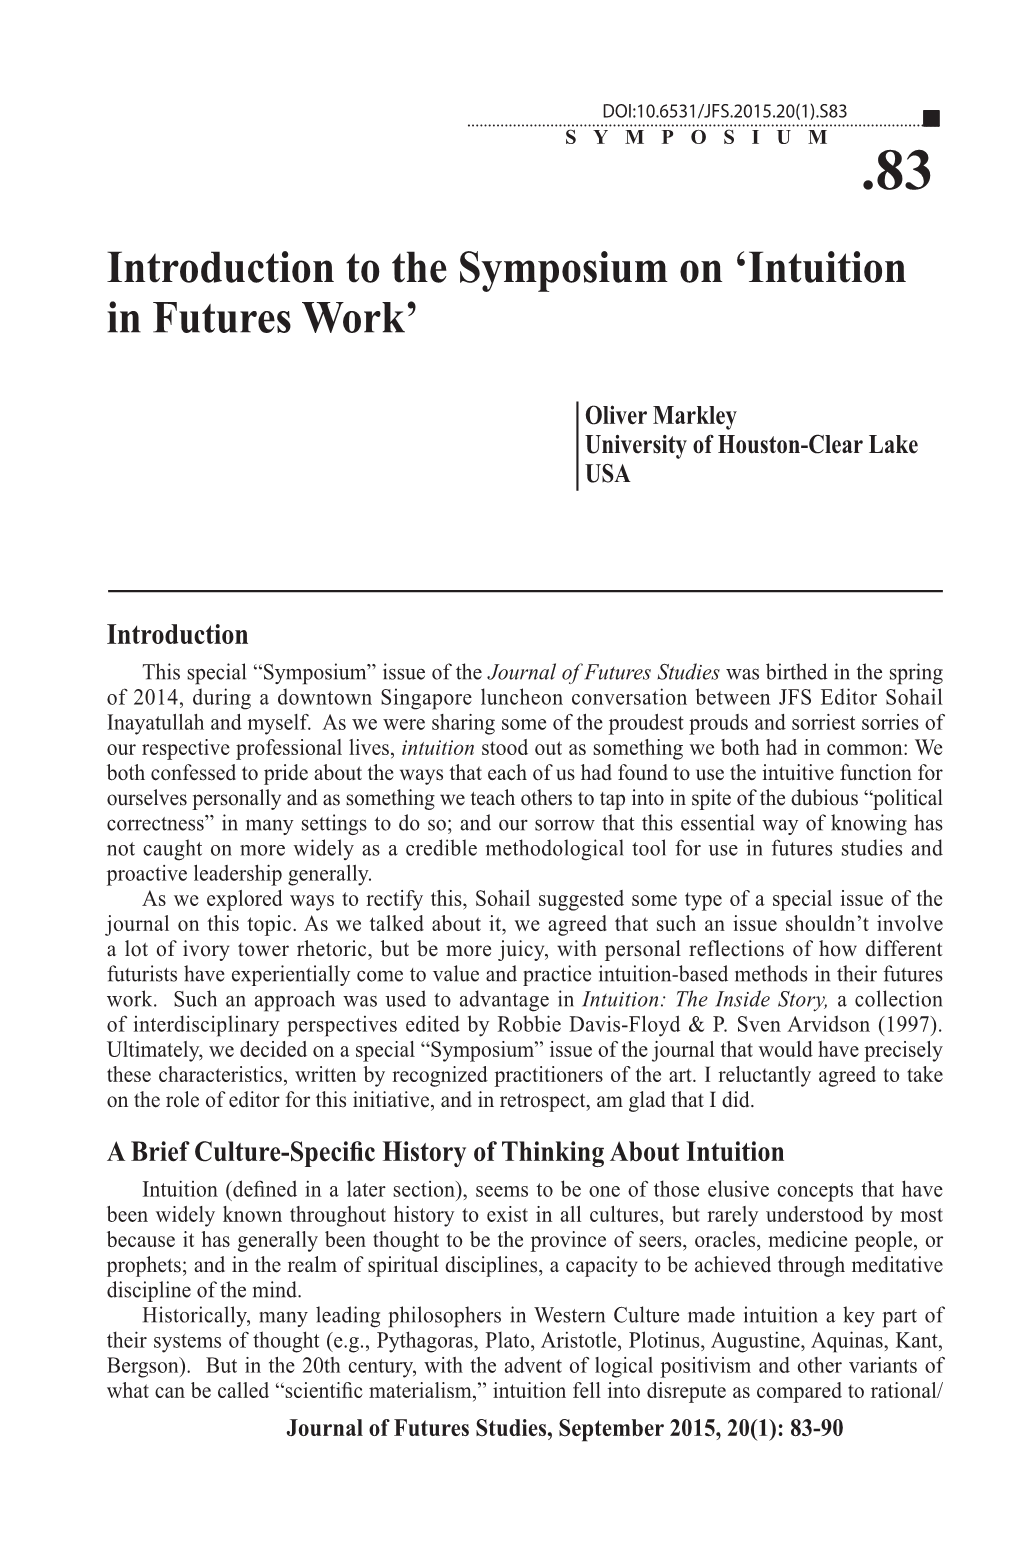 Introduction to the Symposium on 'Intuition in Futures Work'